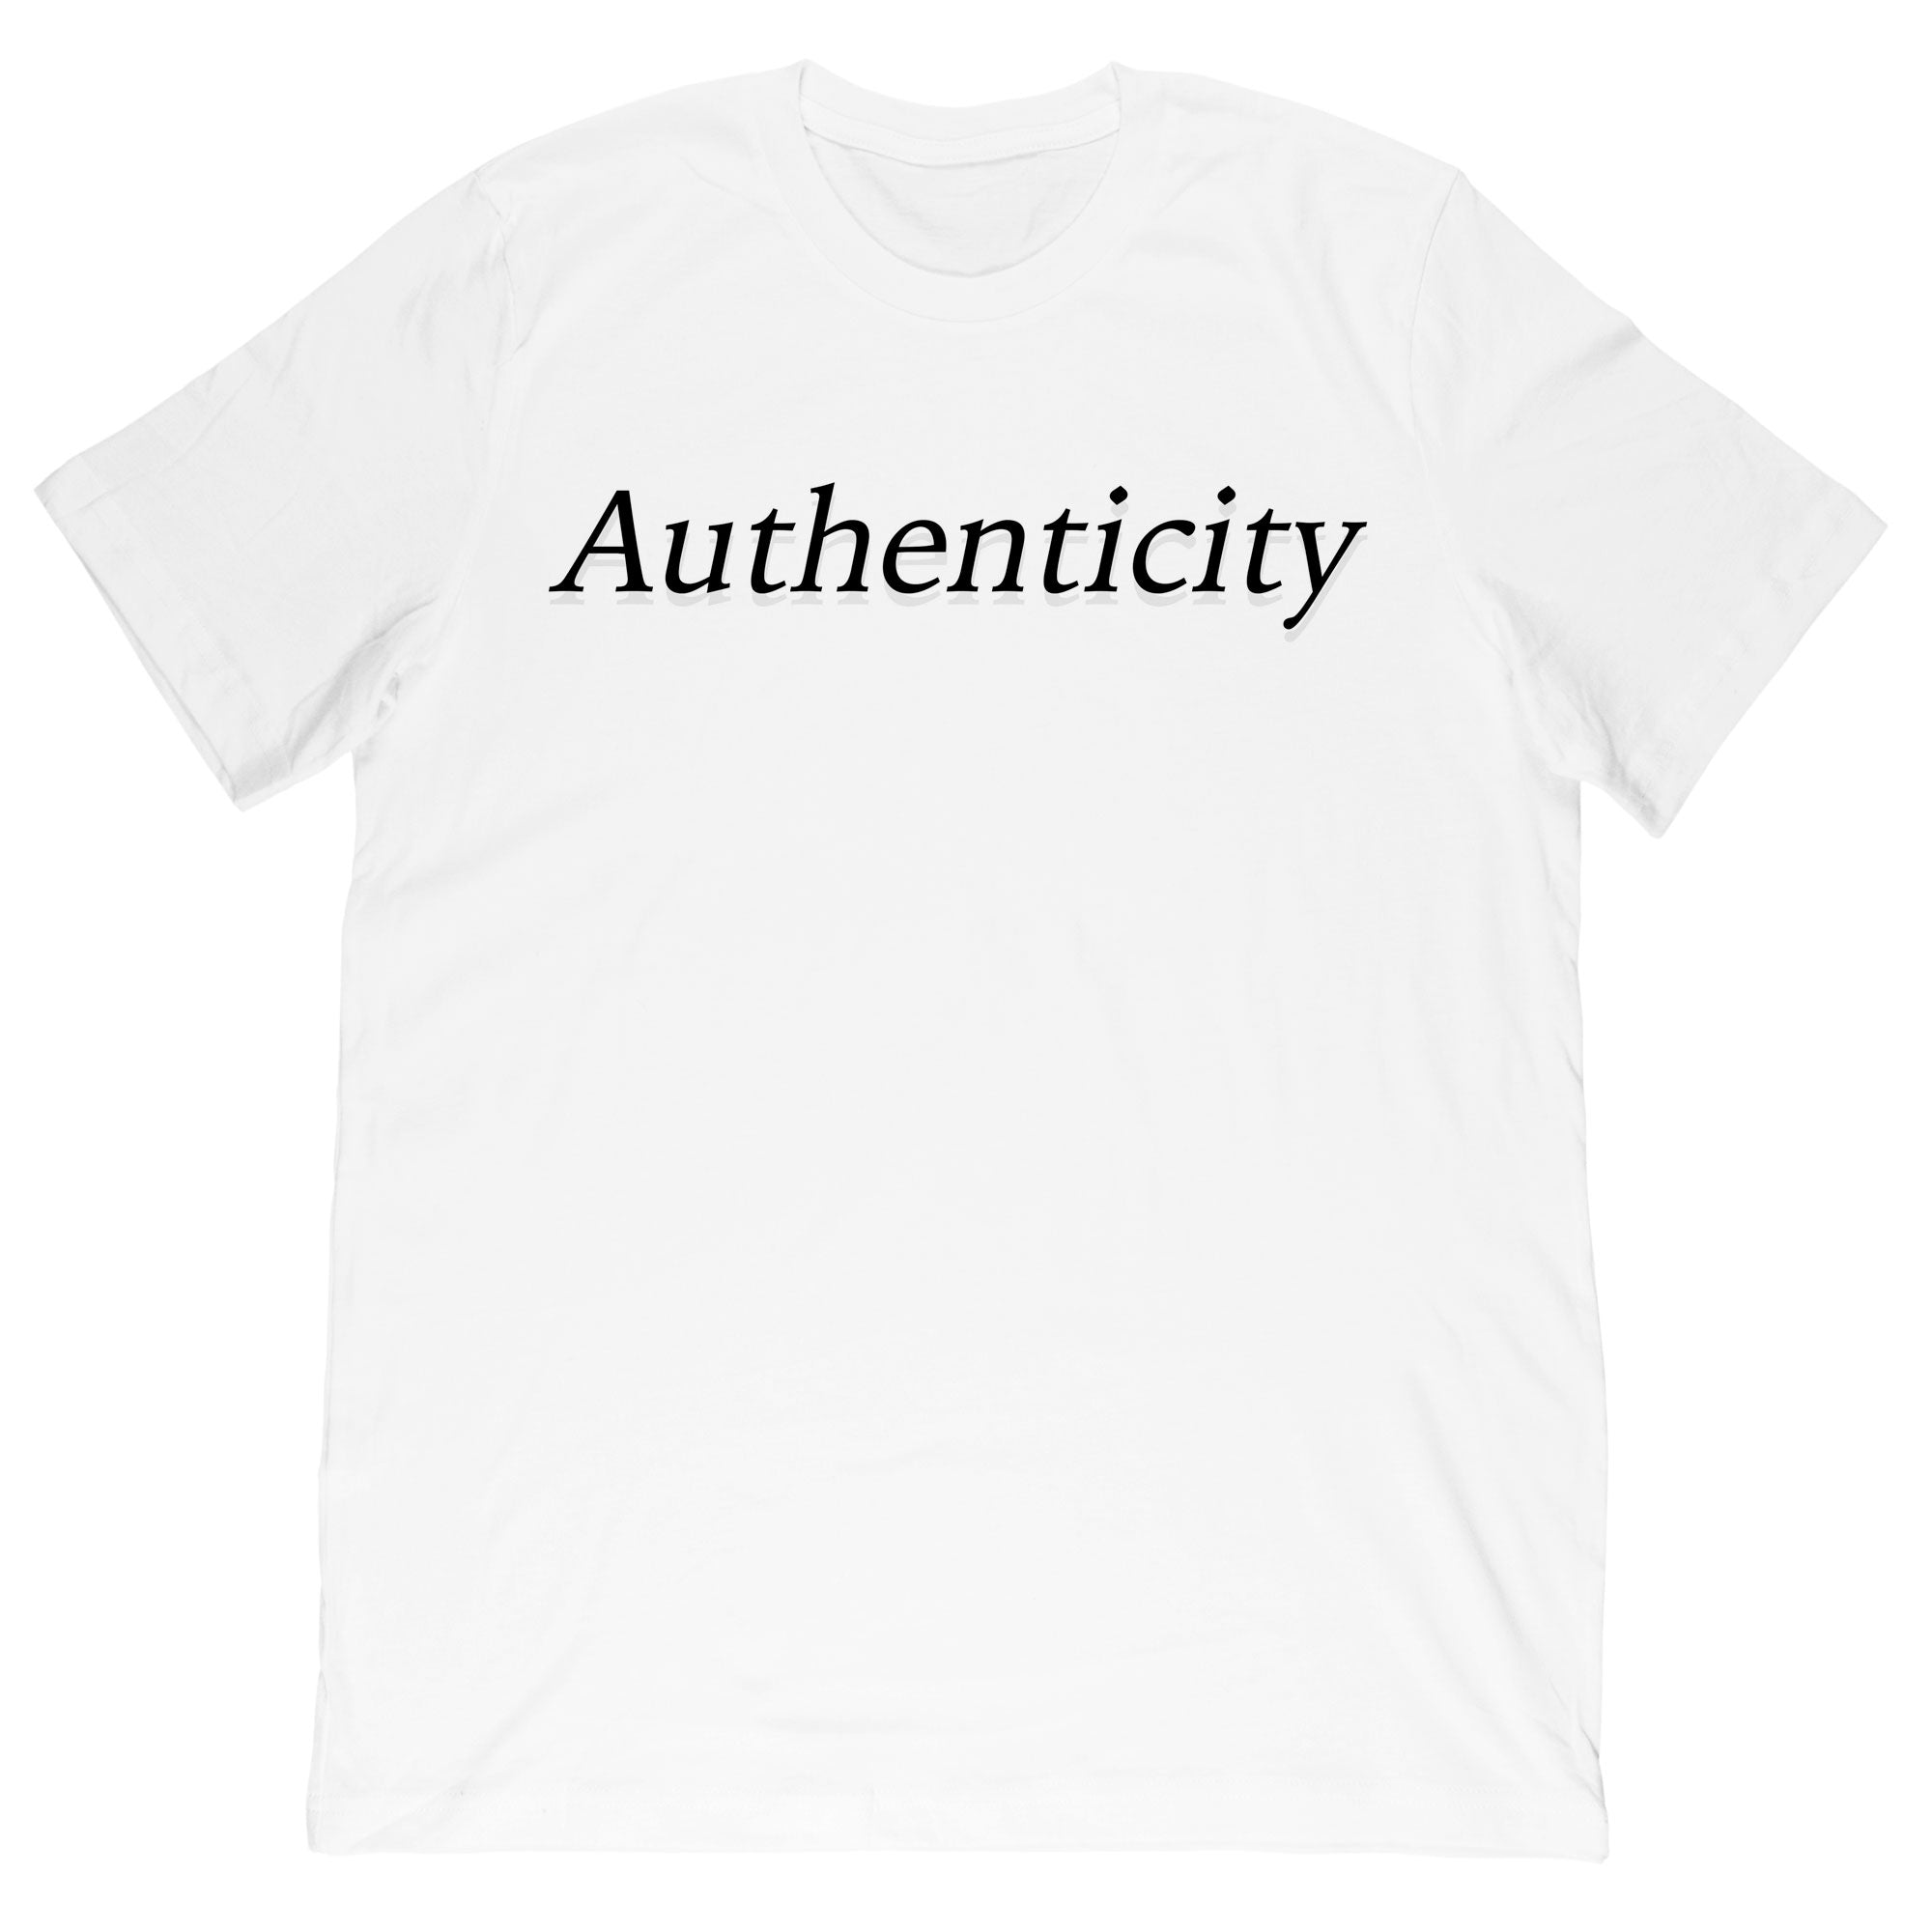 Girl Just Gaming - Authenticity Tee